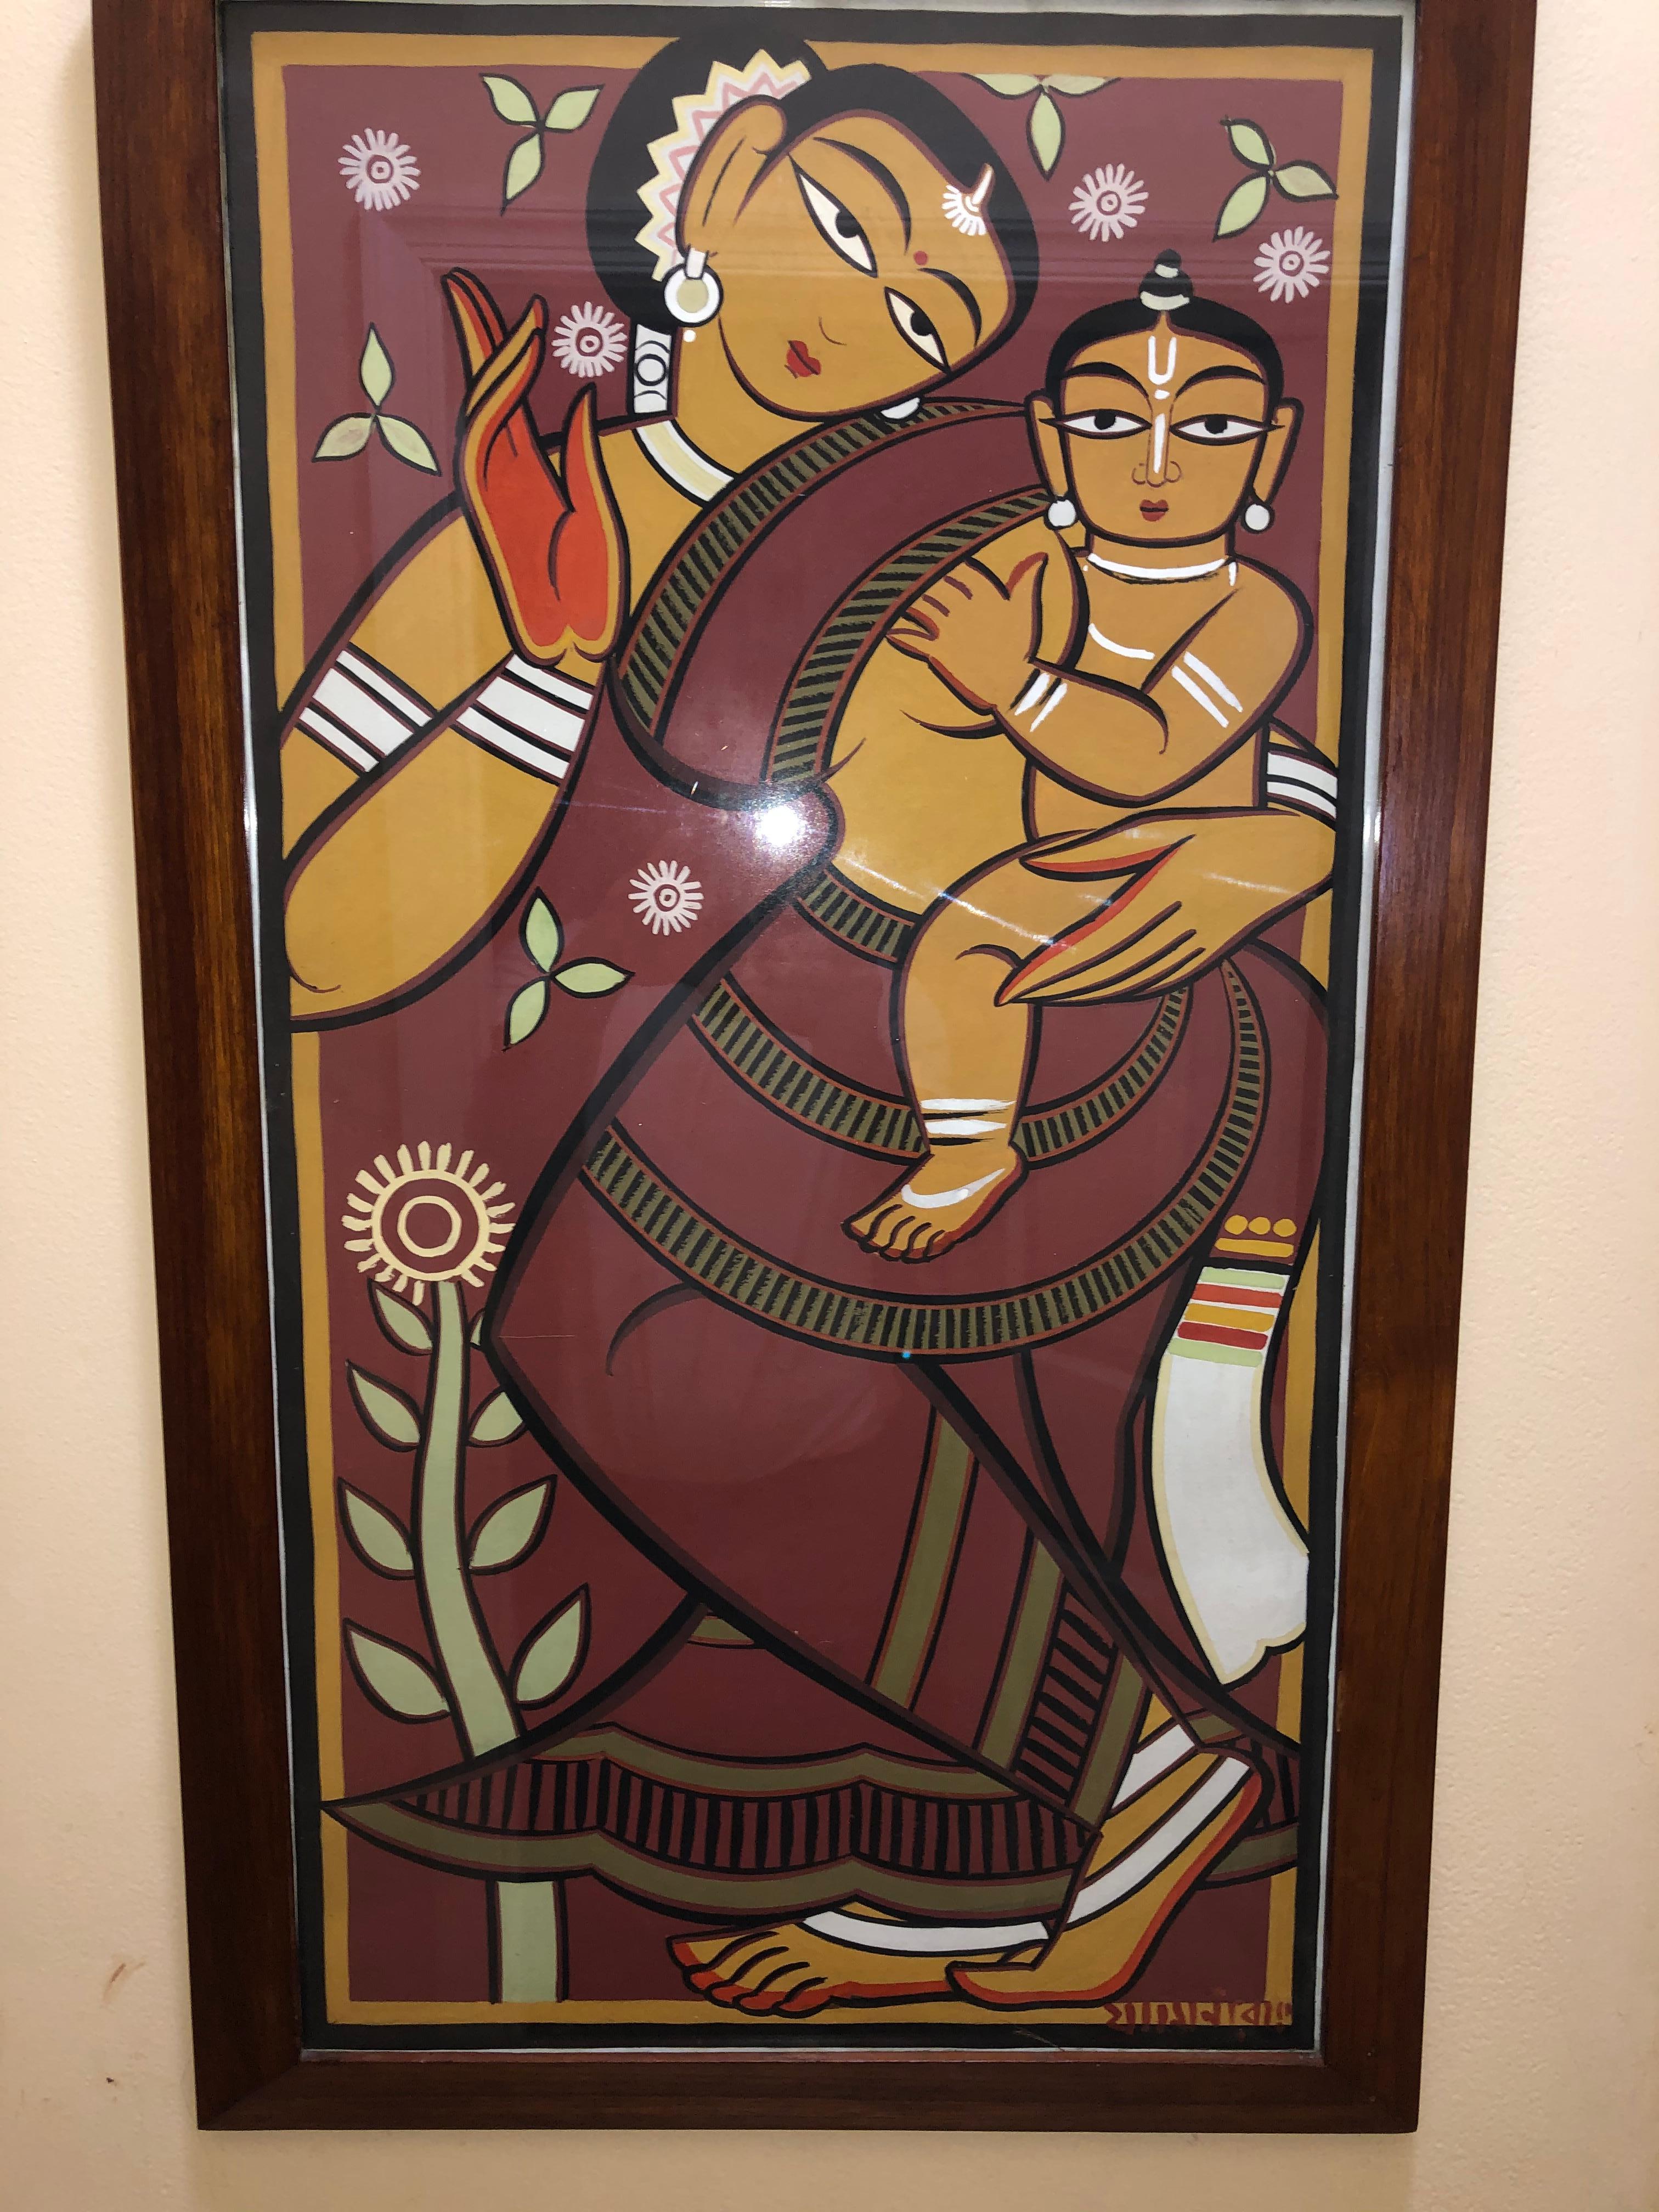 Where was the artist Jamini Roy from?